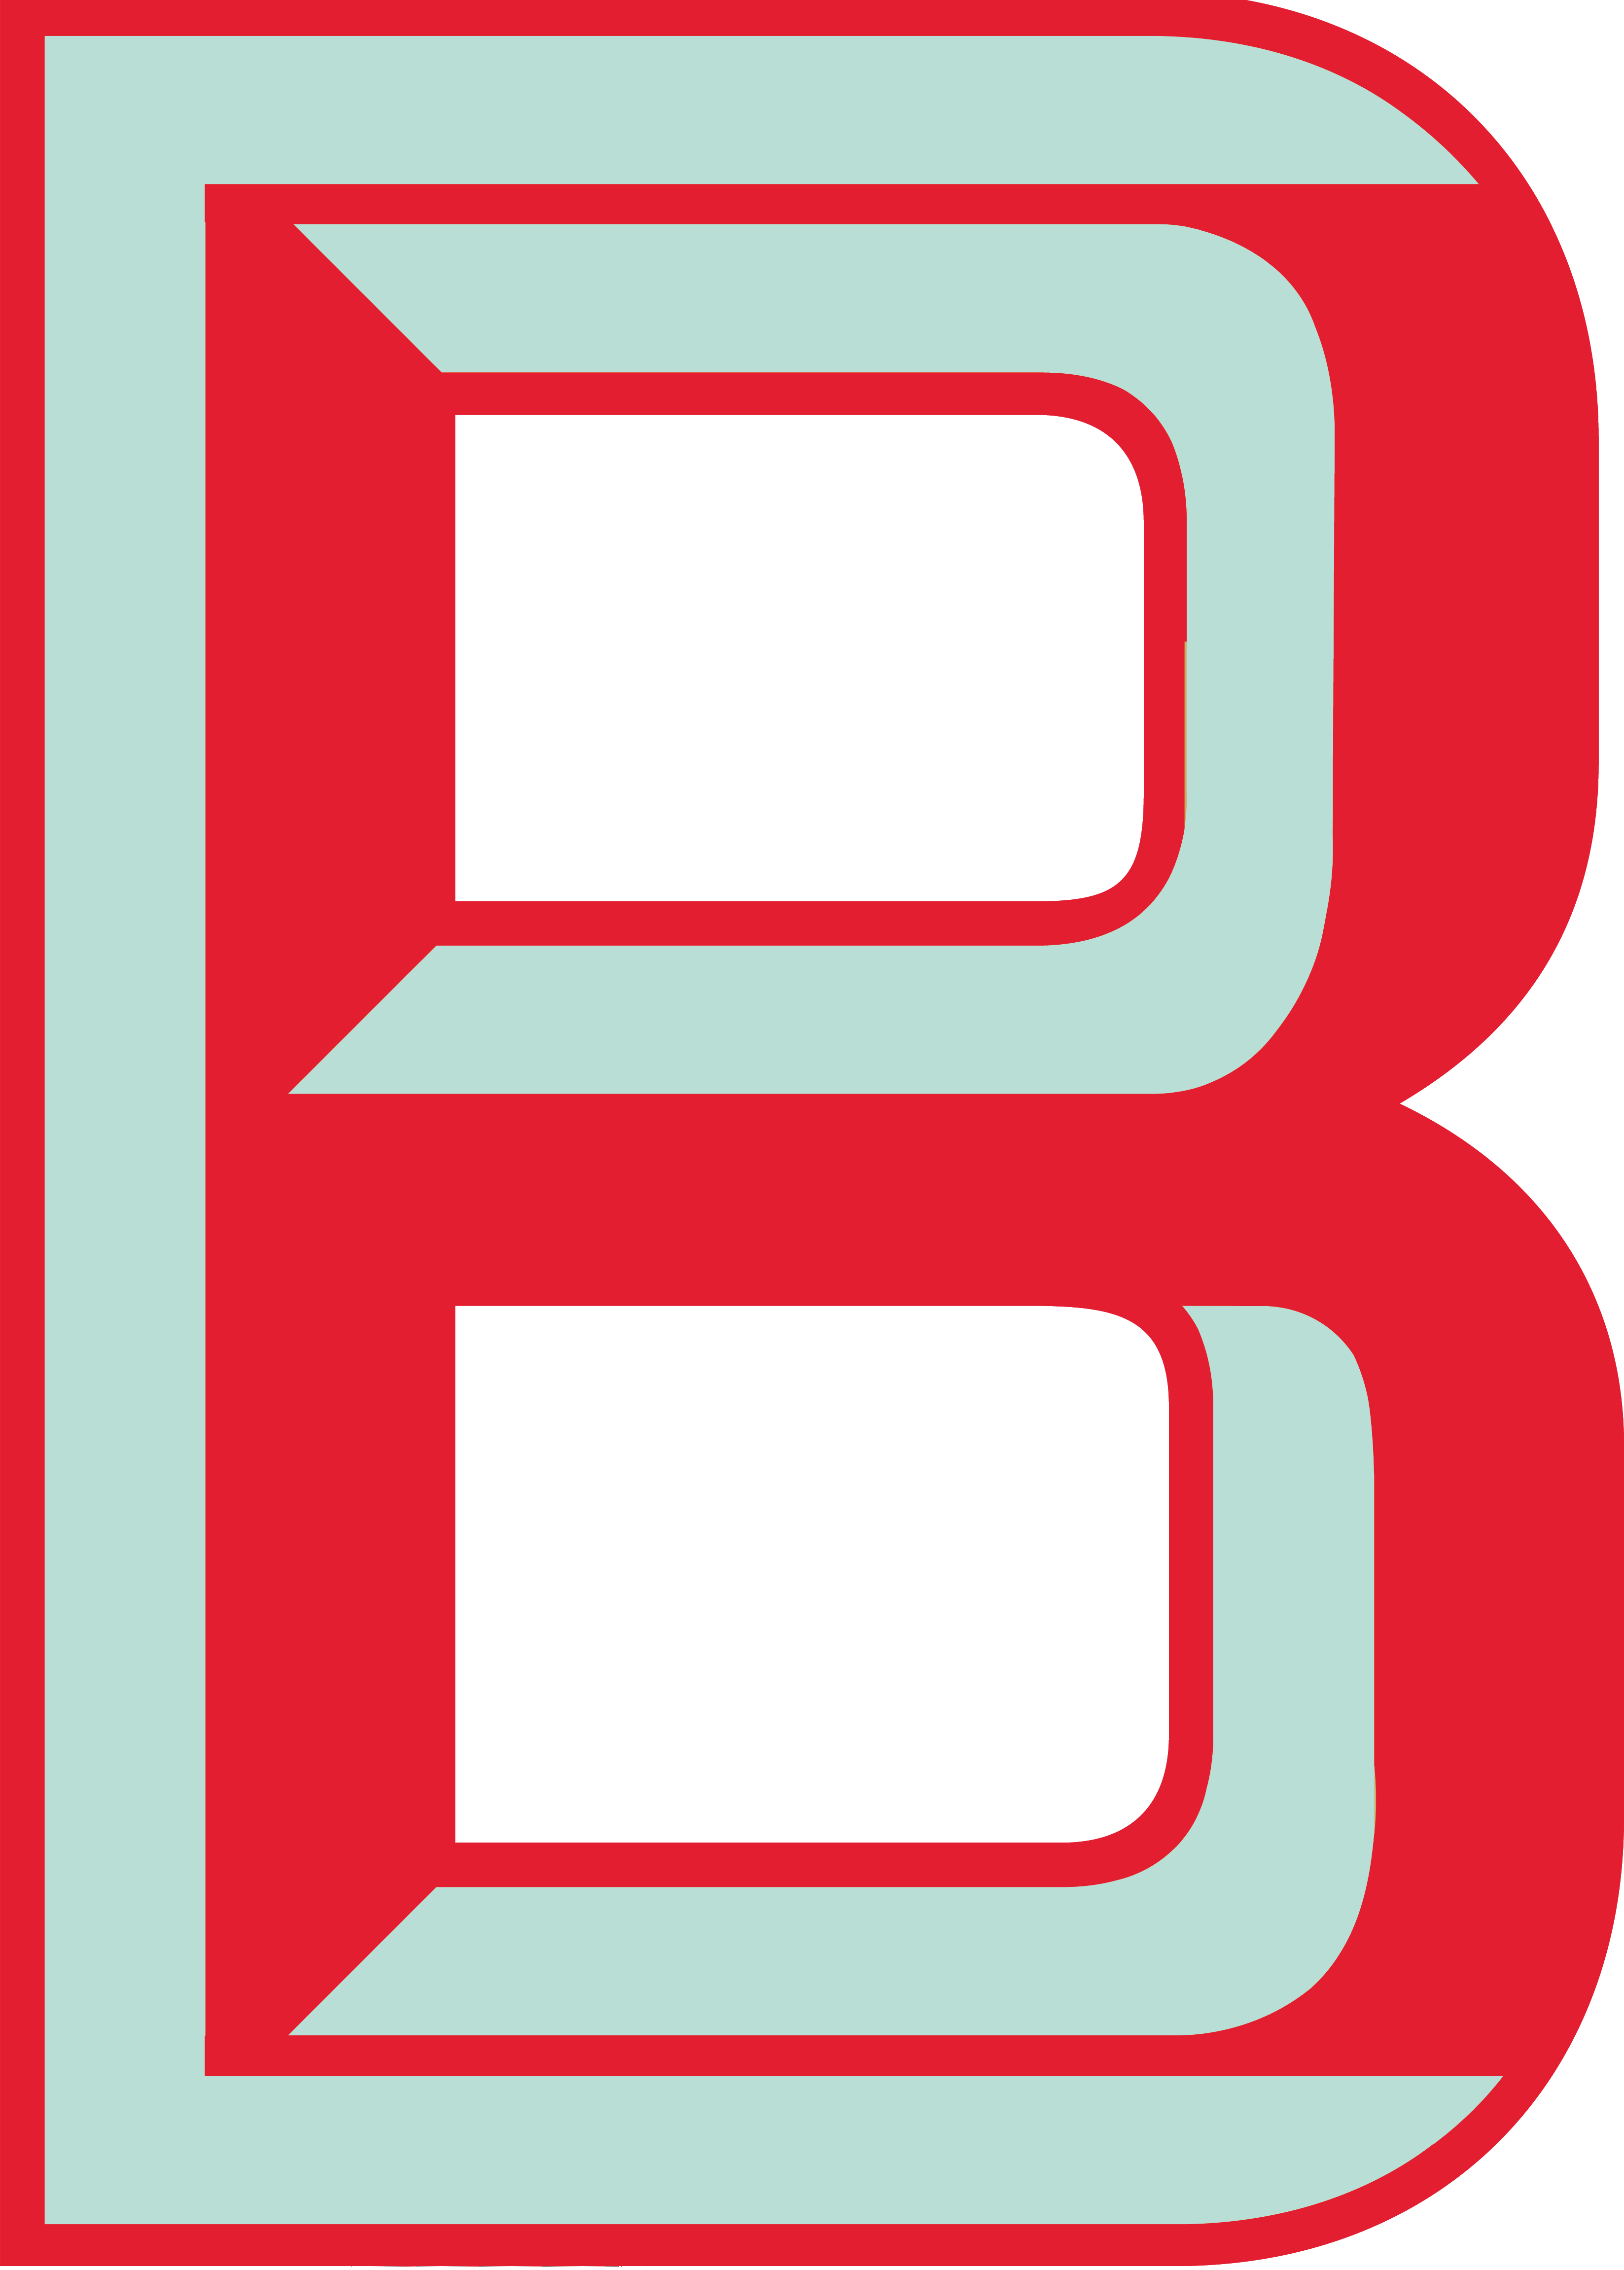 Breanna Kerr's logo. An aqua-colored and red outlined B.